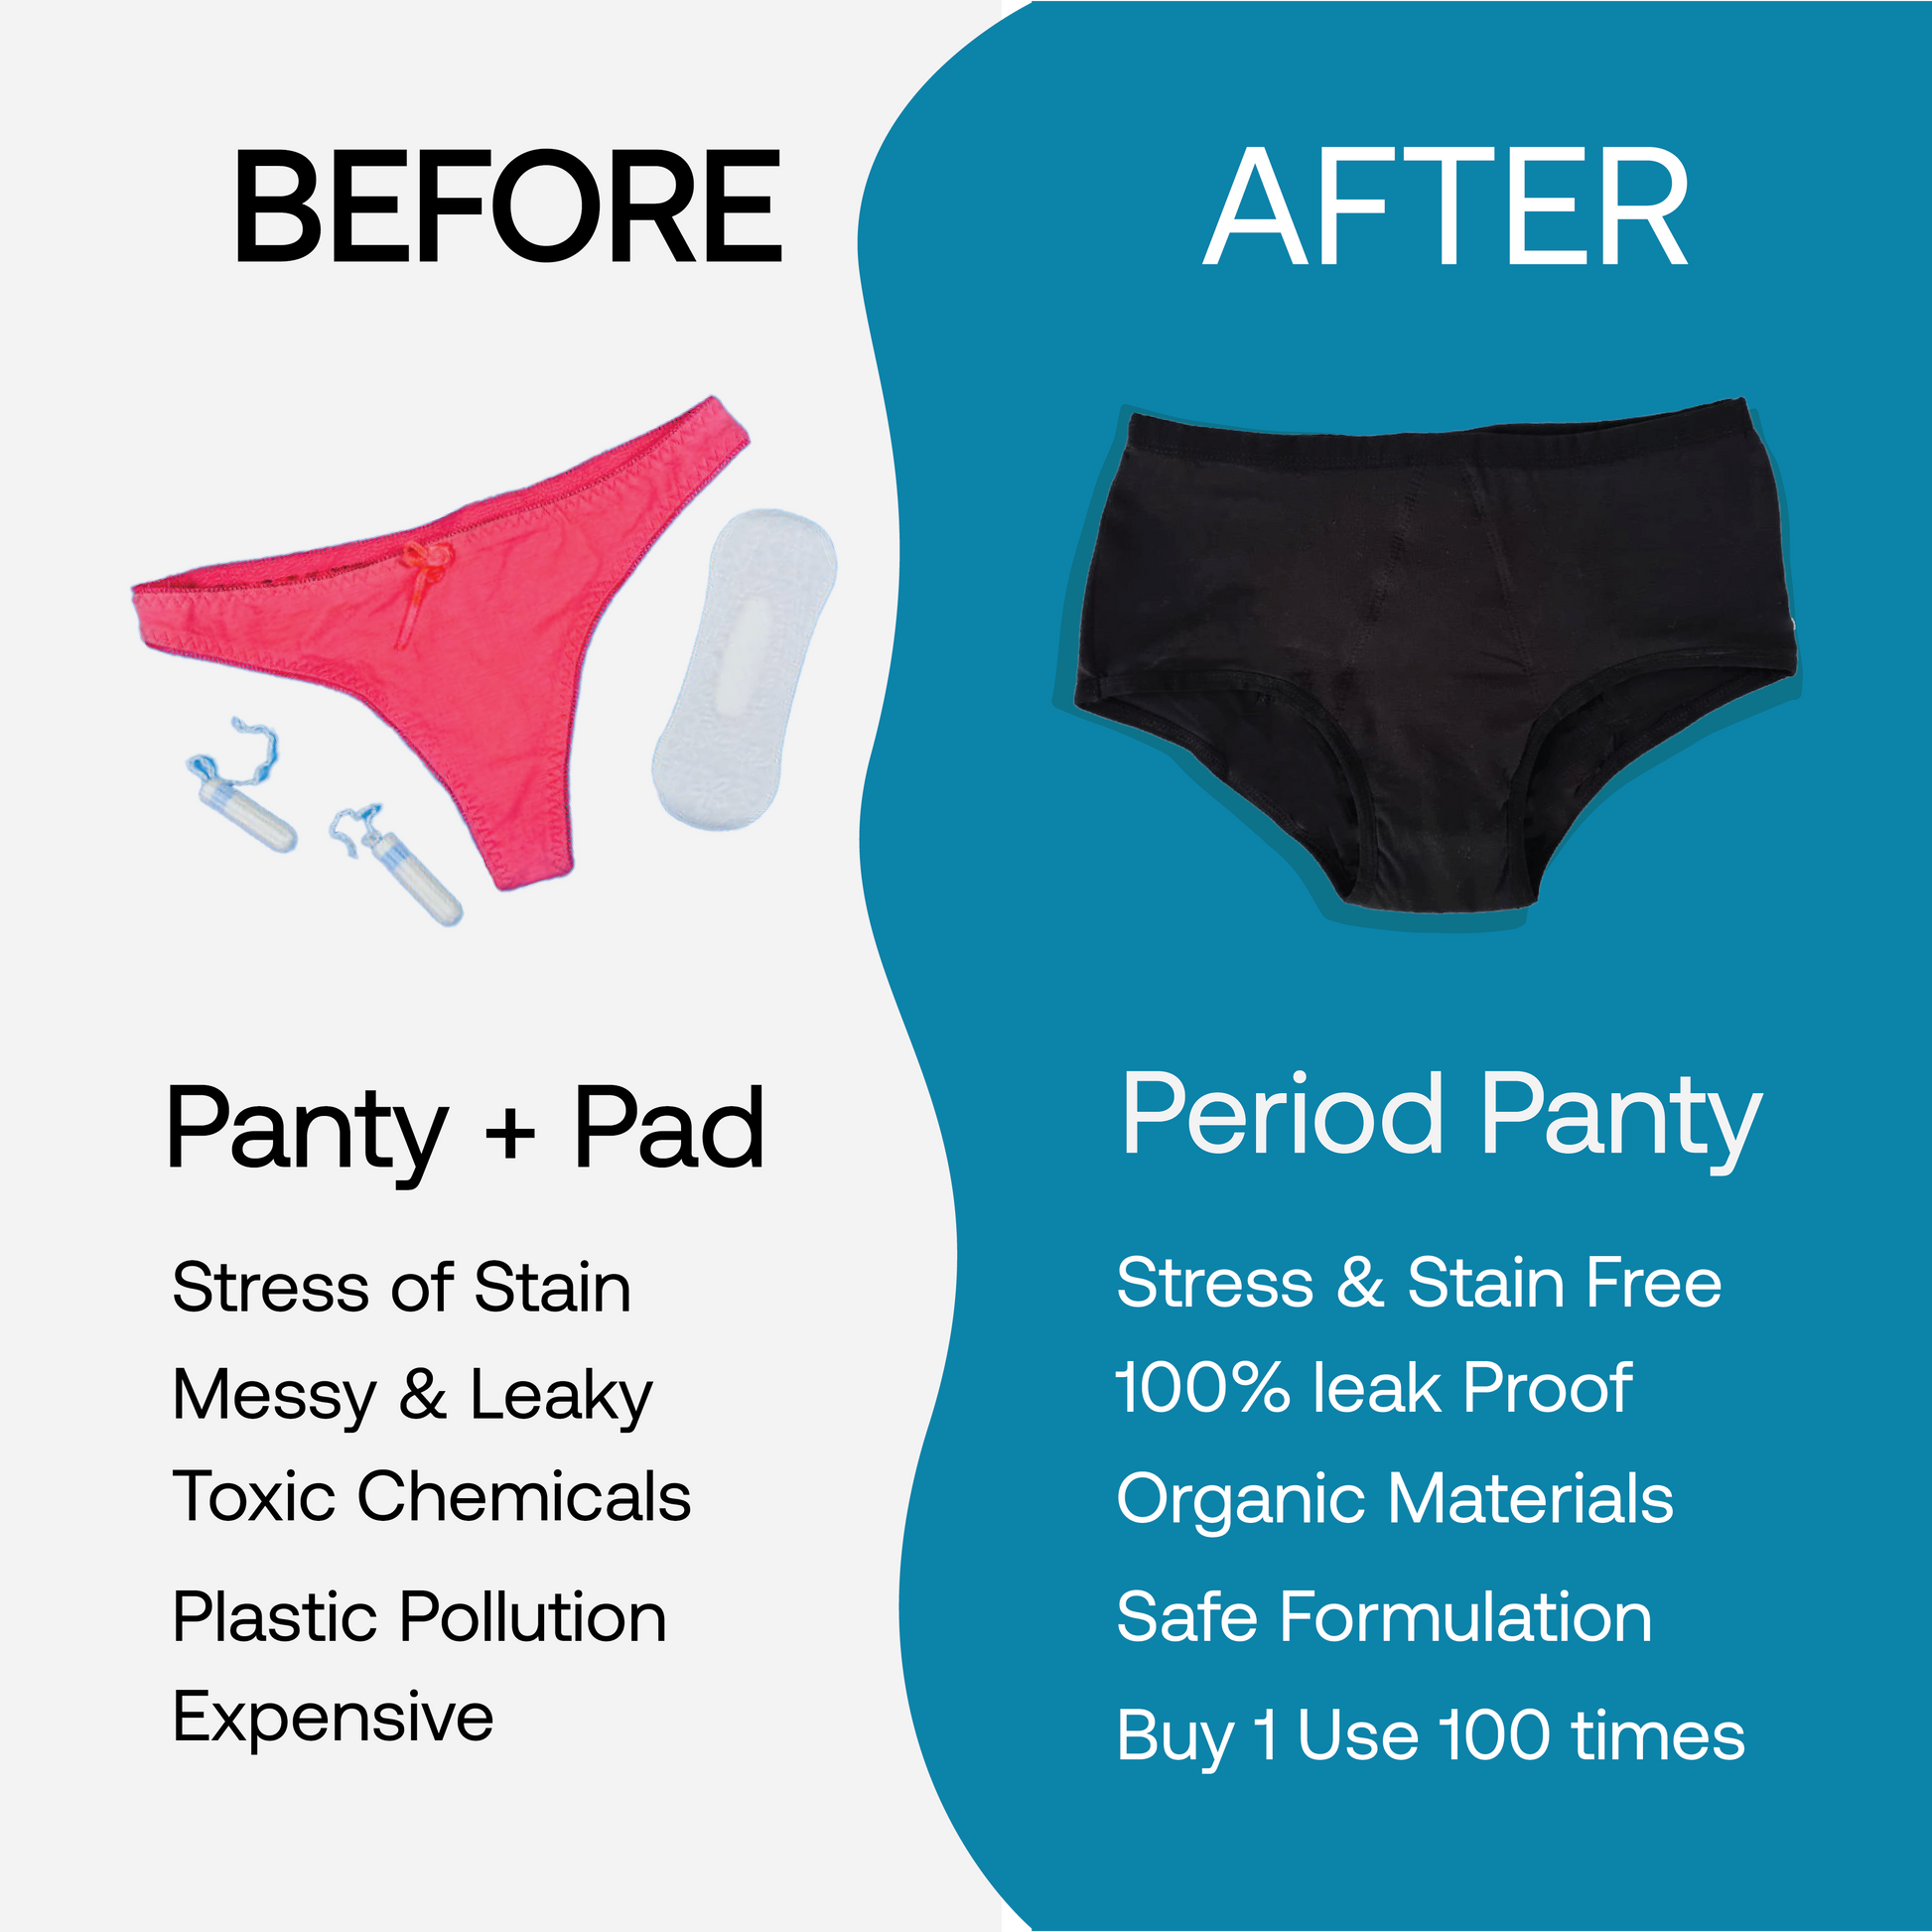 Zorb Reusable Period Panty Key Features